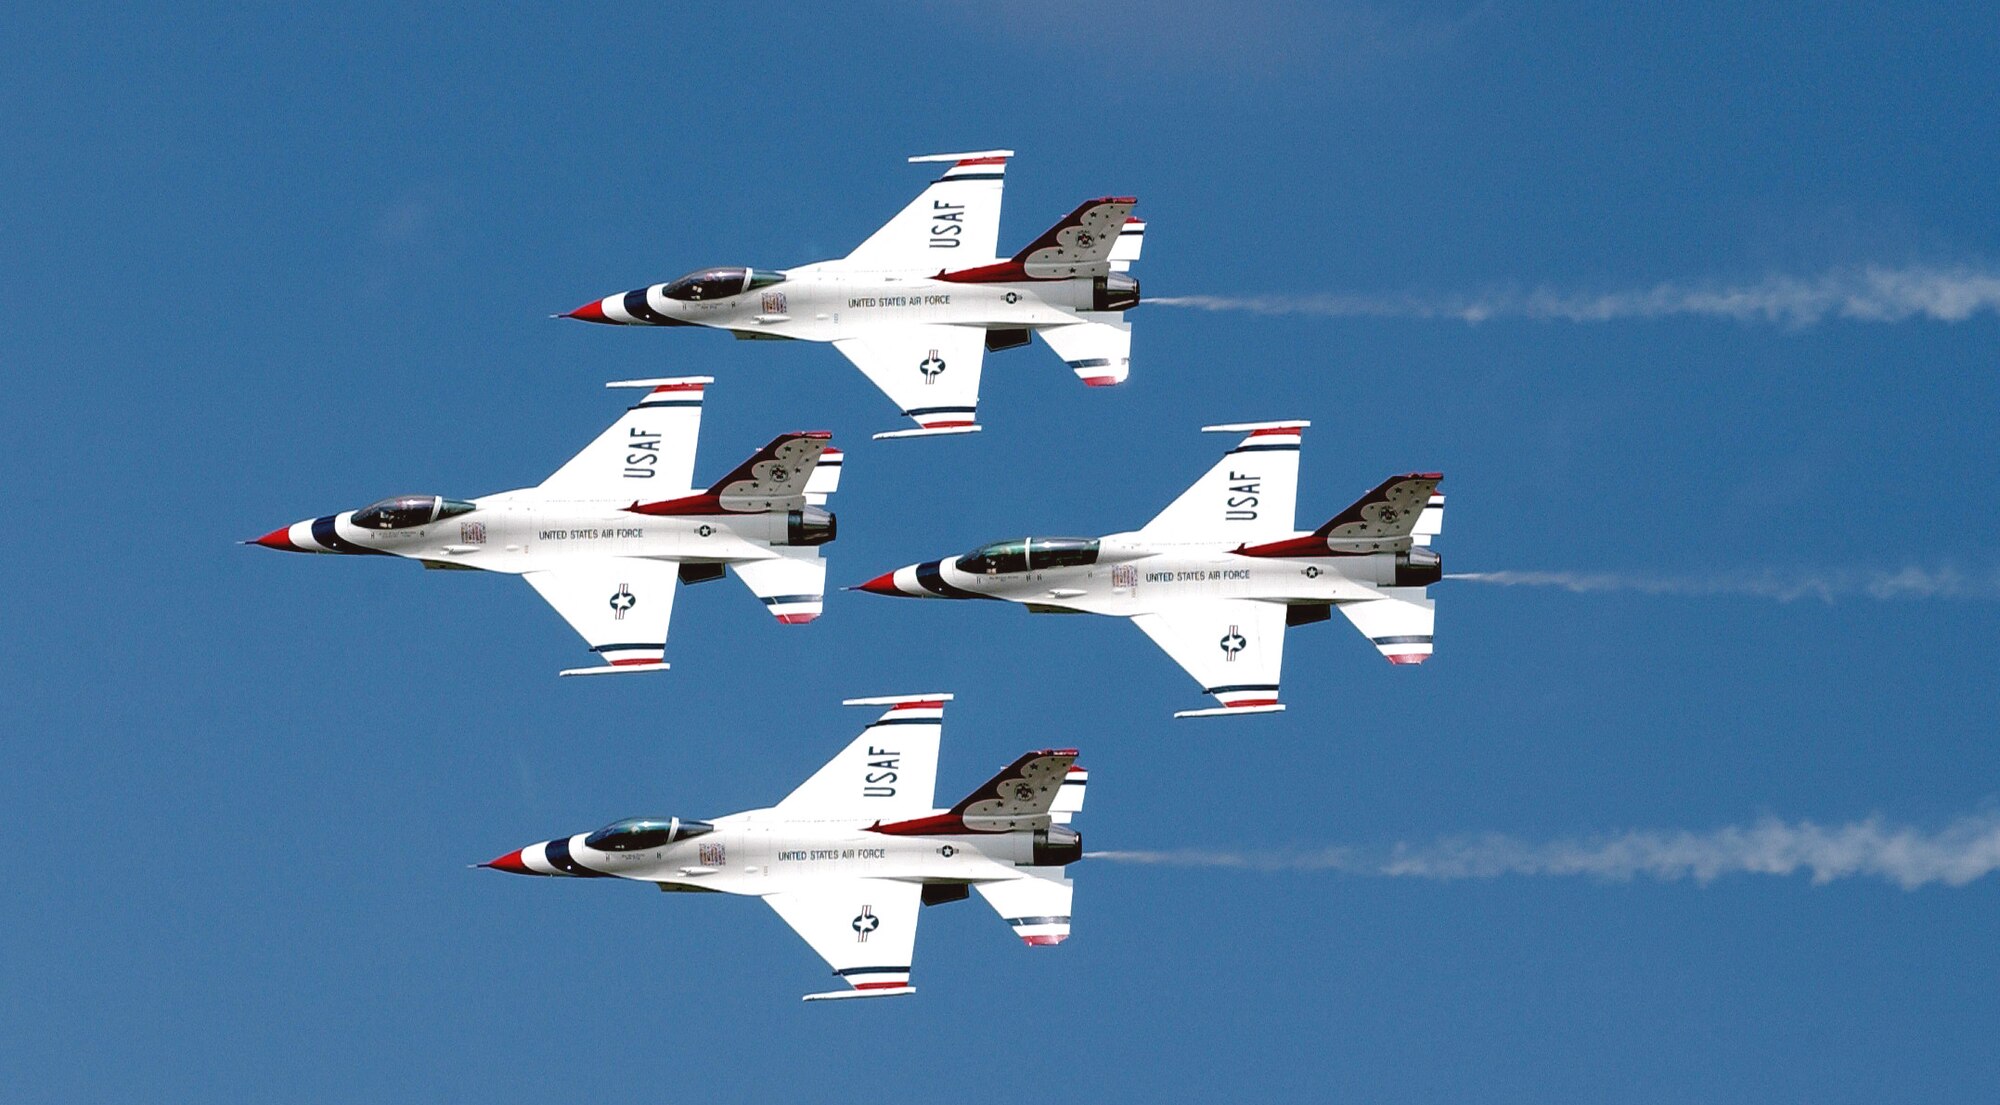 BARKSDALE AIR FORCE BASE, La. -- The U.S. Air Force Thunderbirds perform at the 2003 "Defenders of Liberty" air show held here May 10-11.  (U.S. Air Force photo by Staff Sgt. Denise A. Rayder)